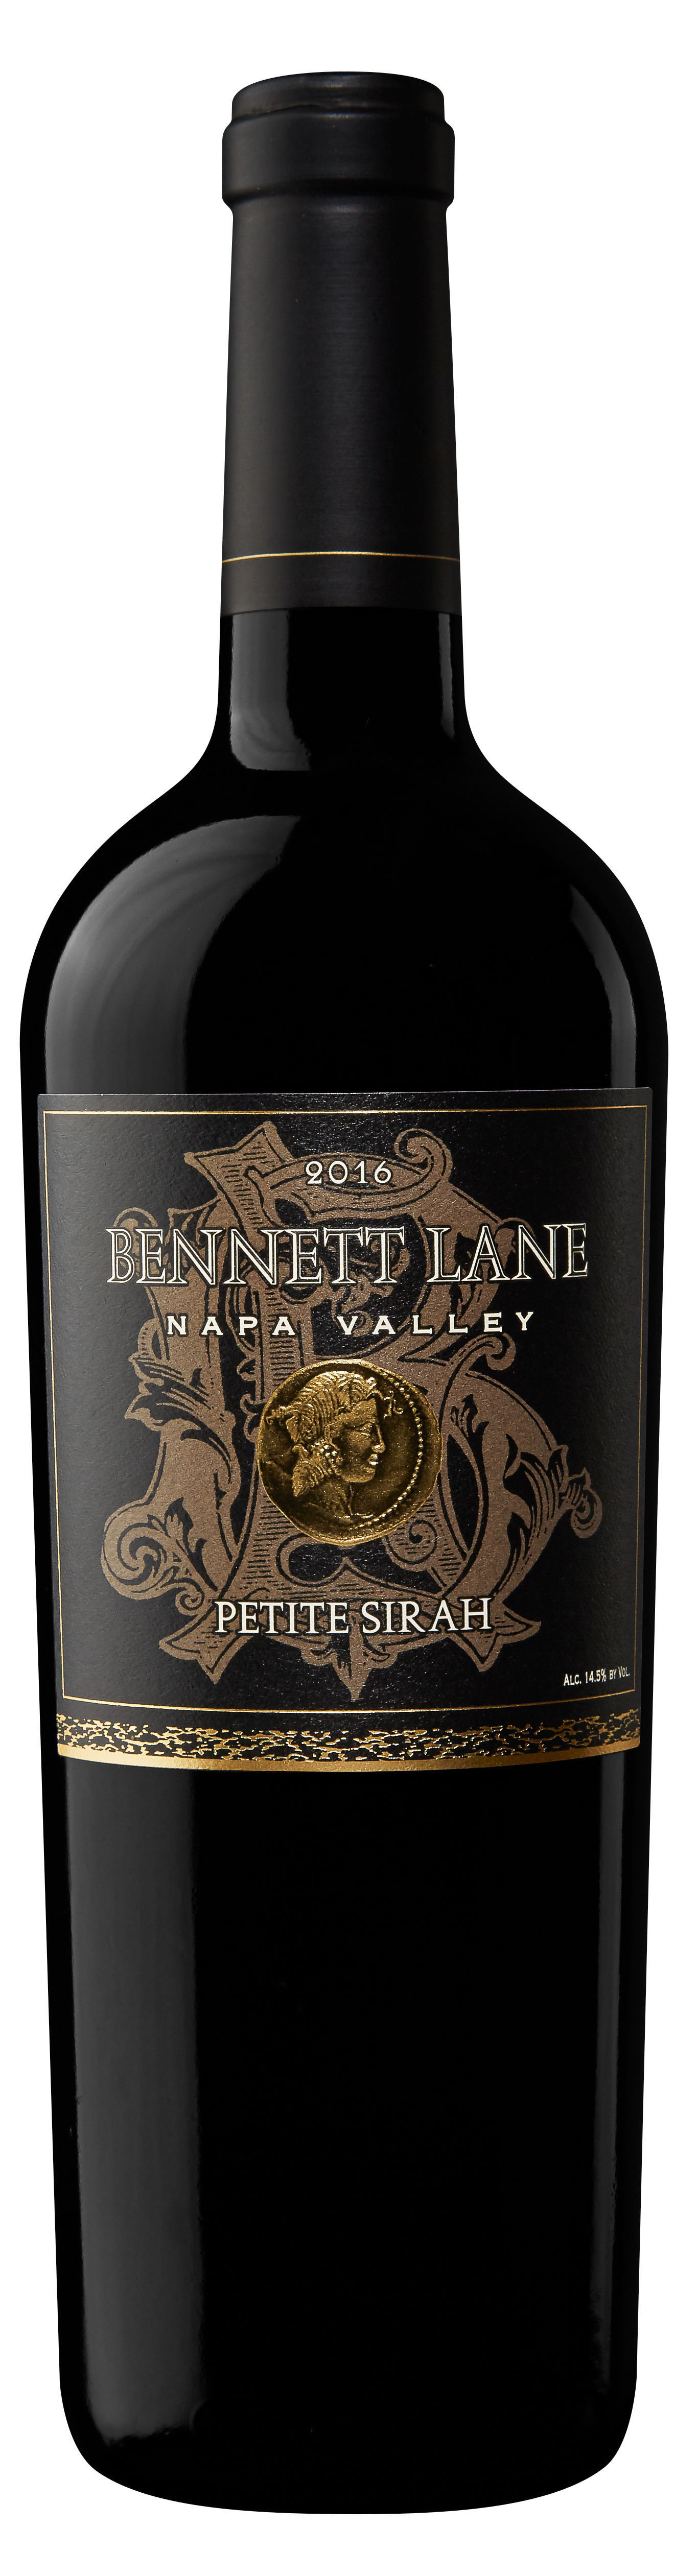 Product Image for 2016 Petite Sirah